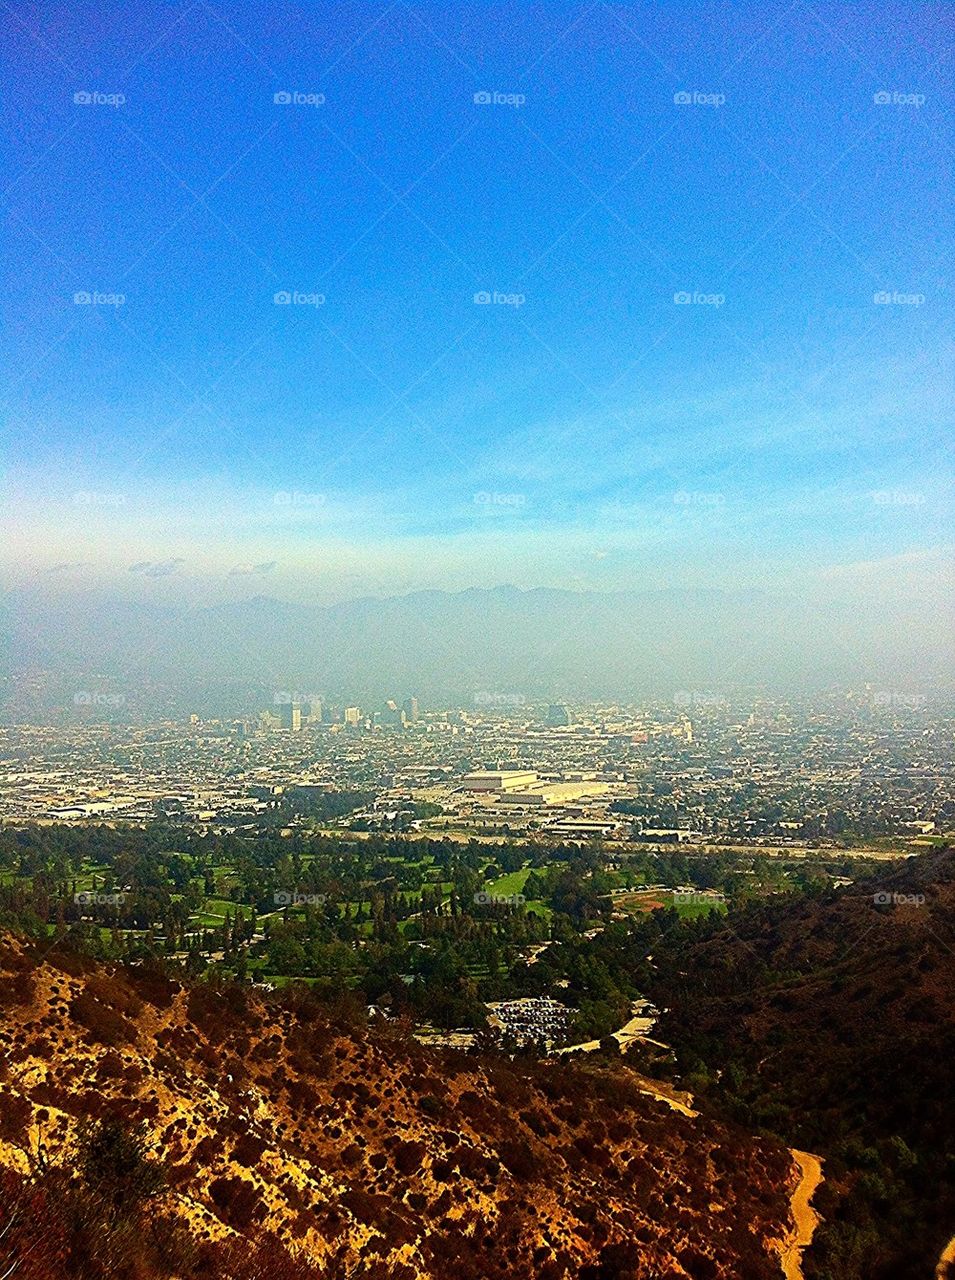 Los Angeles scenery from Griffith Park